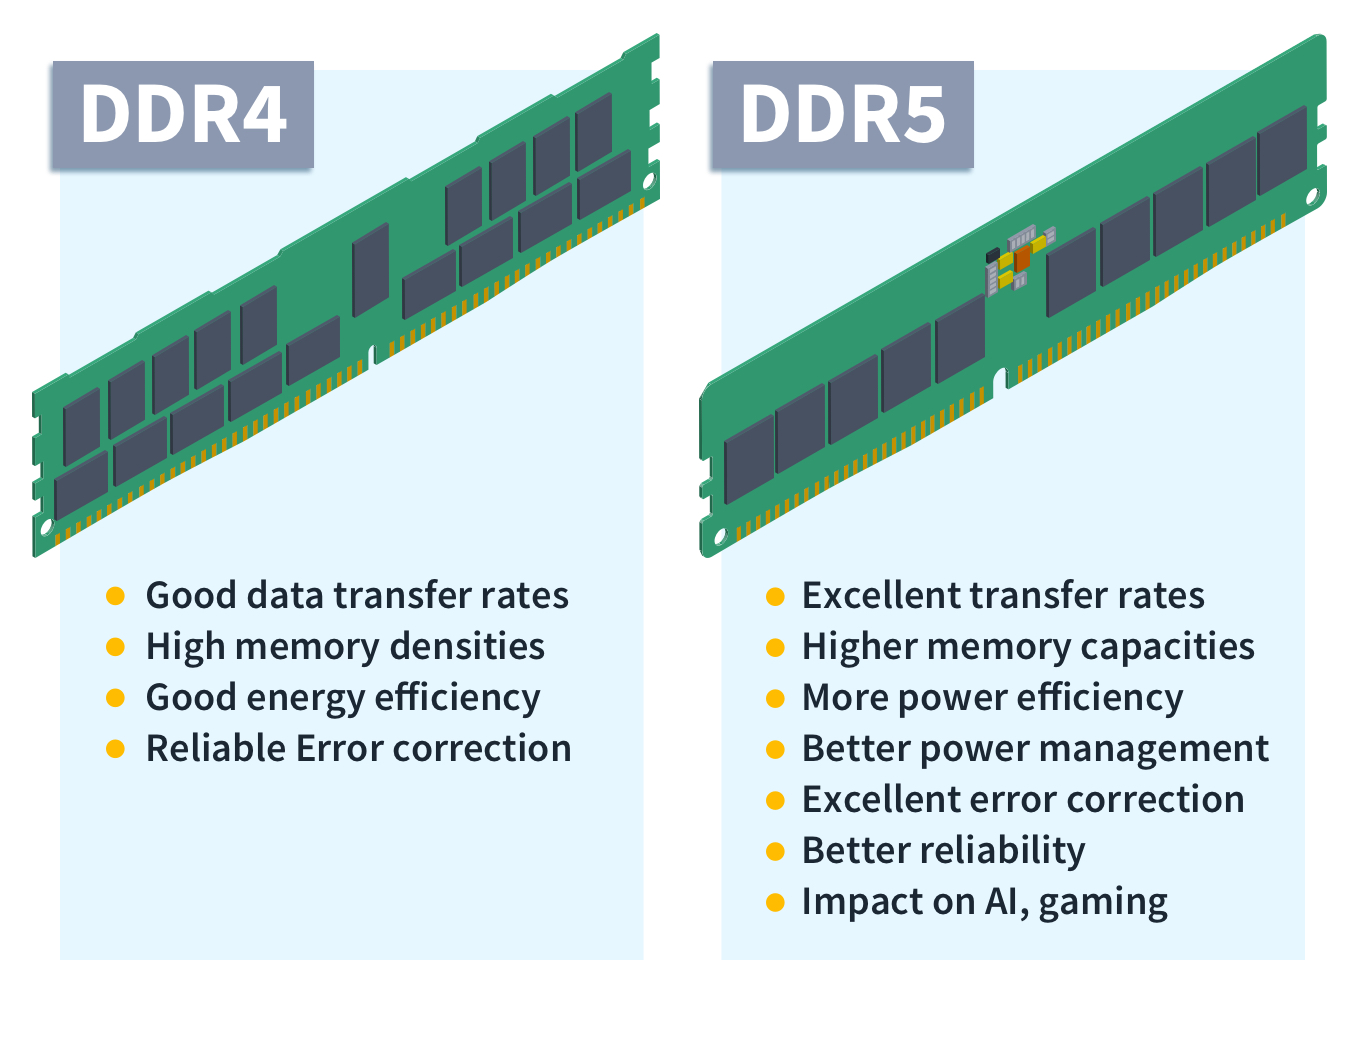 DDR4 (Double Data Rate 4) Definition